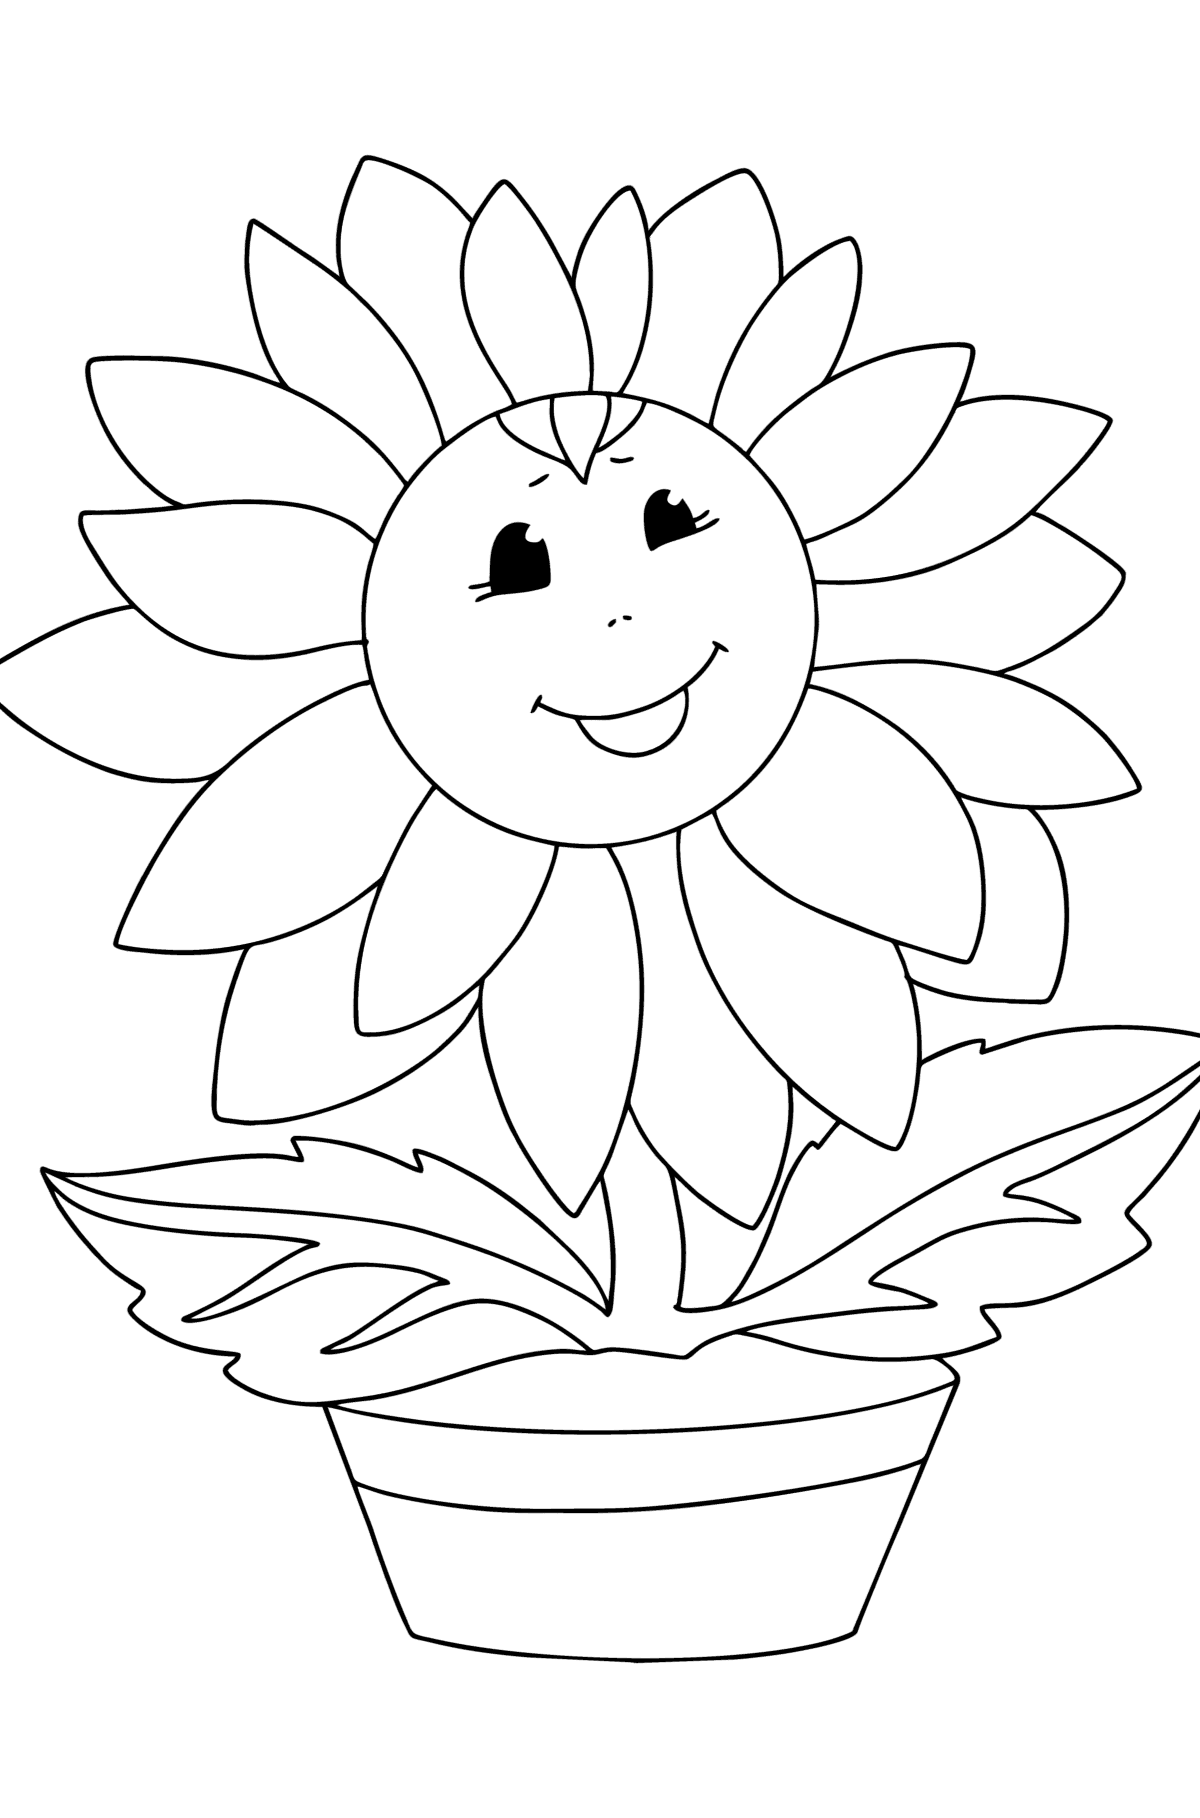 Sunflower with eyes coloring page - Coloring Pages for Kids